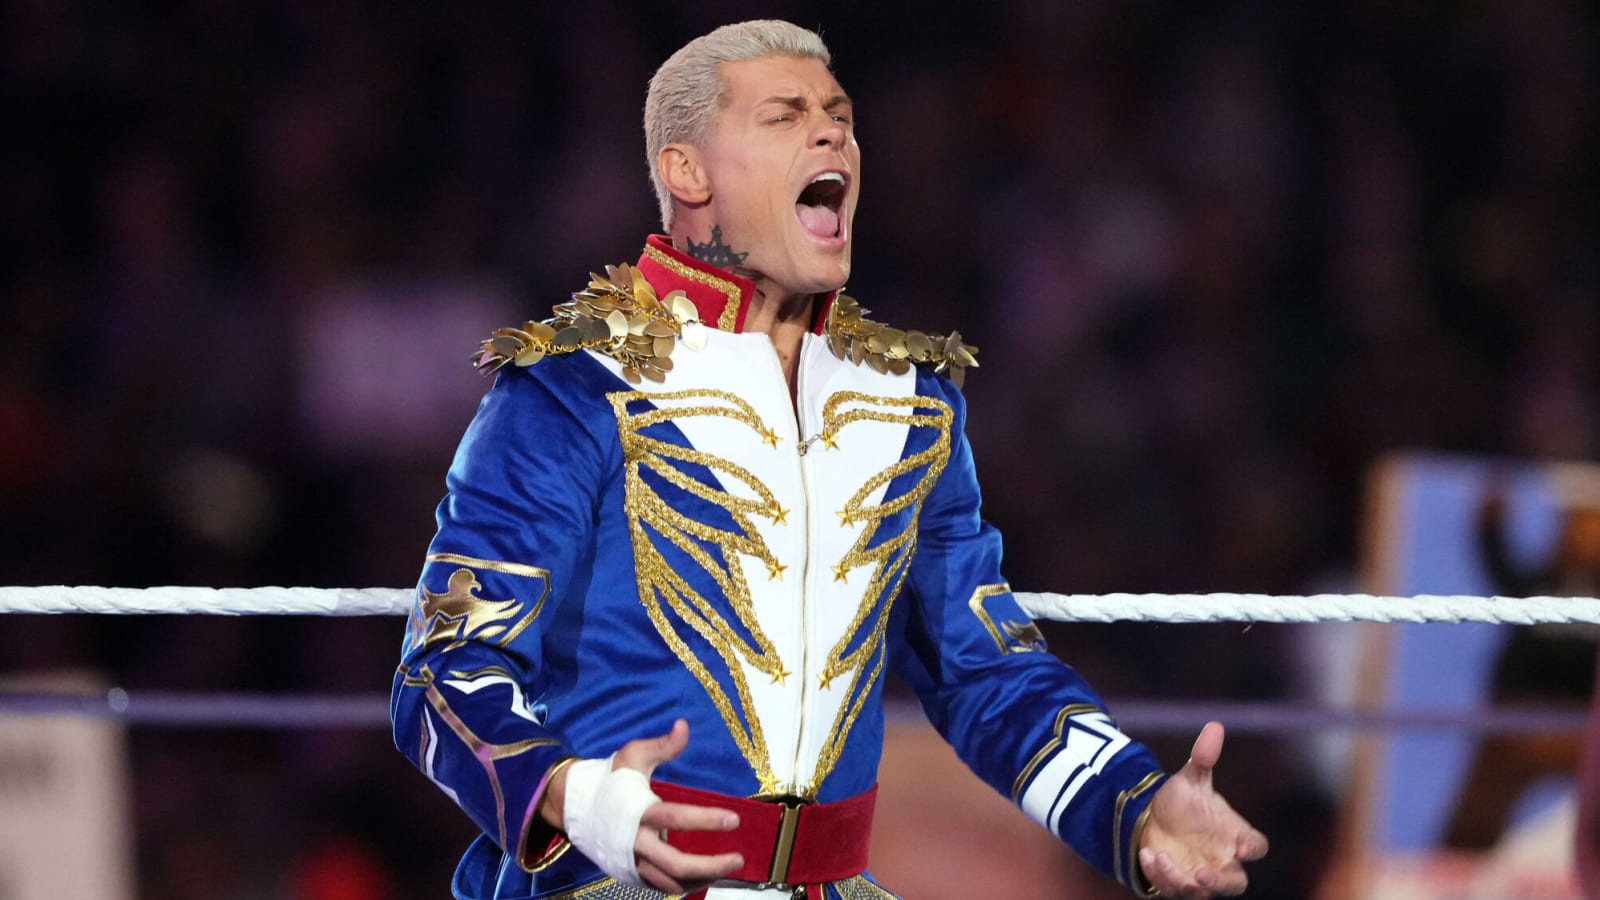 Cody Rhodes wants to get a 'classic wrestling manager' to join him during his title reign after getting tricked by Logan Paul